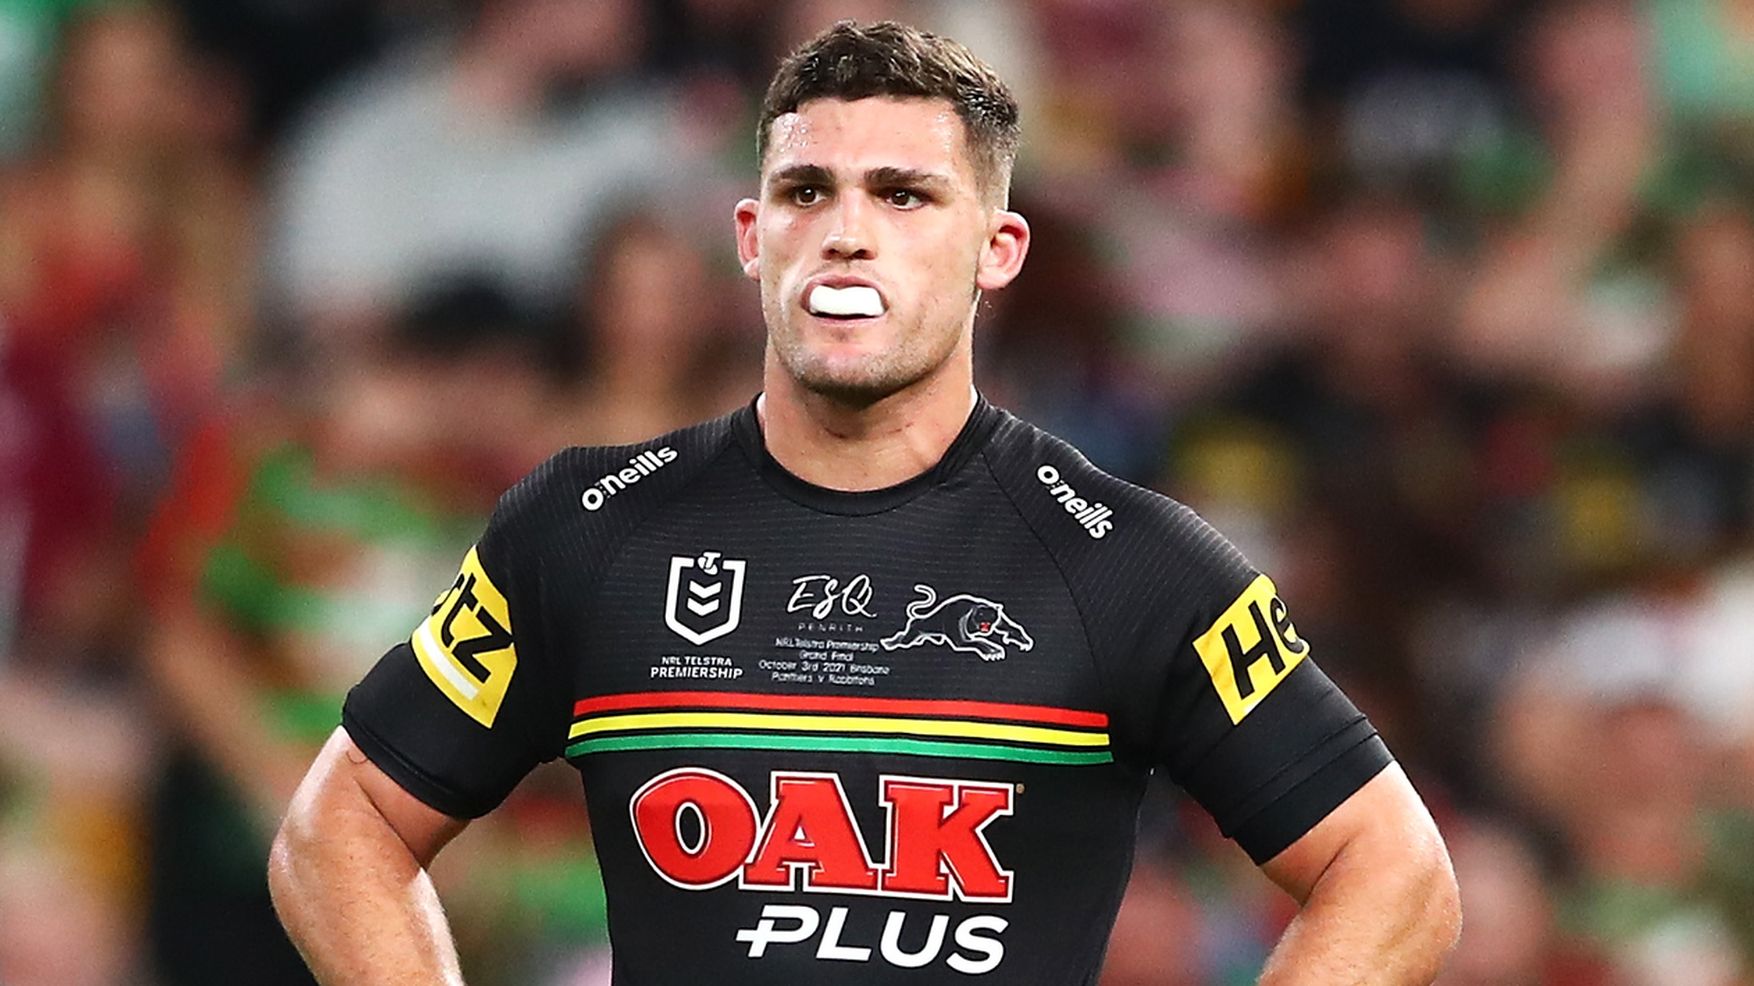 Panthers halfback Nathan Cleary to miss at least first three rounds of NRL season